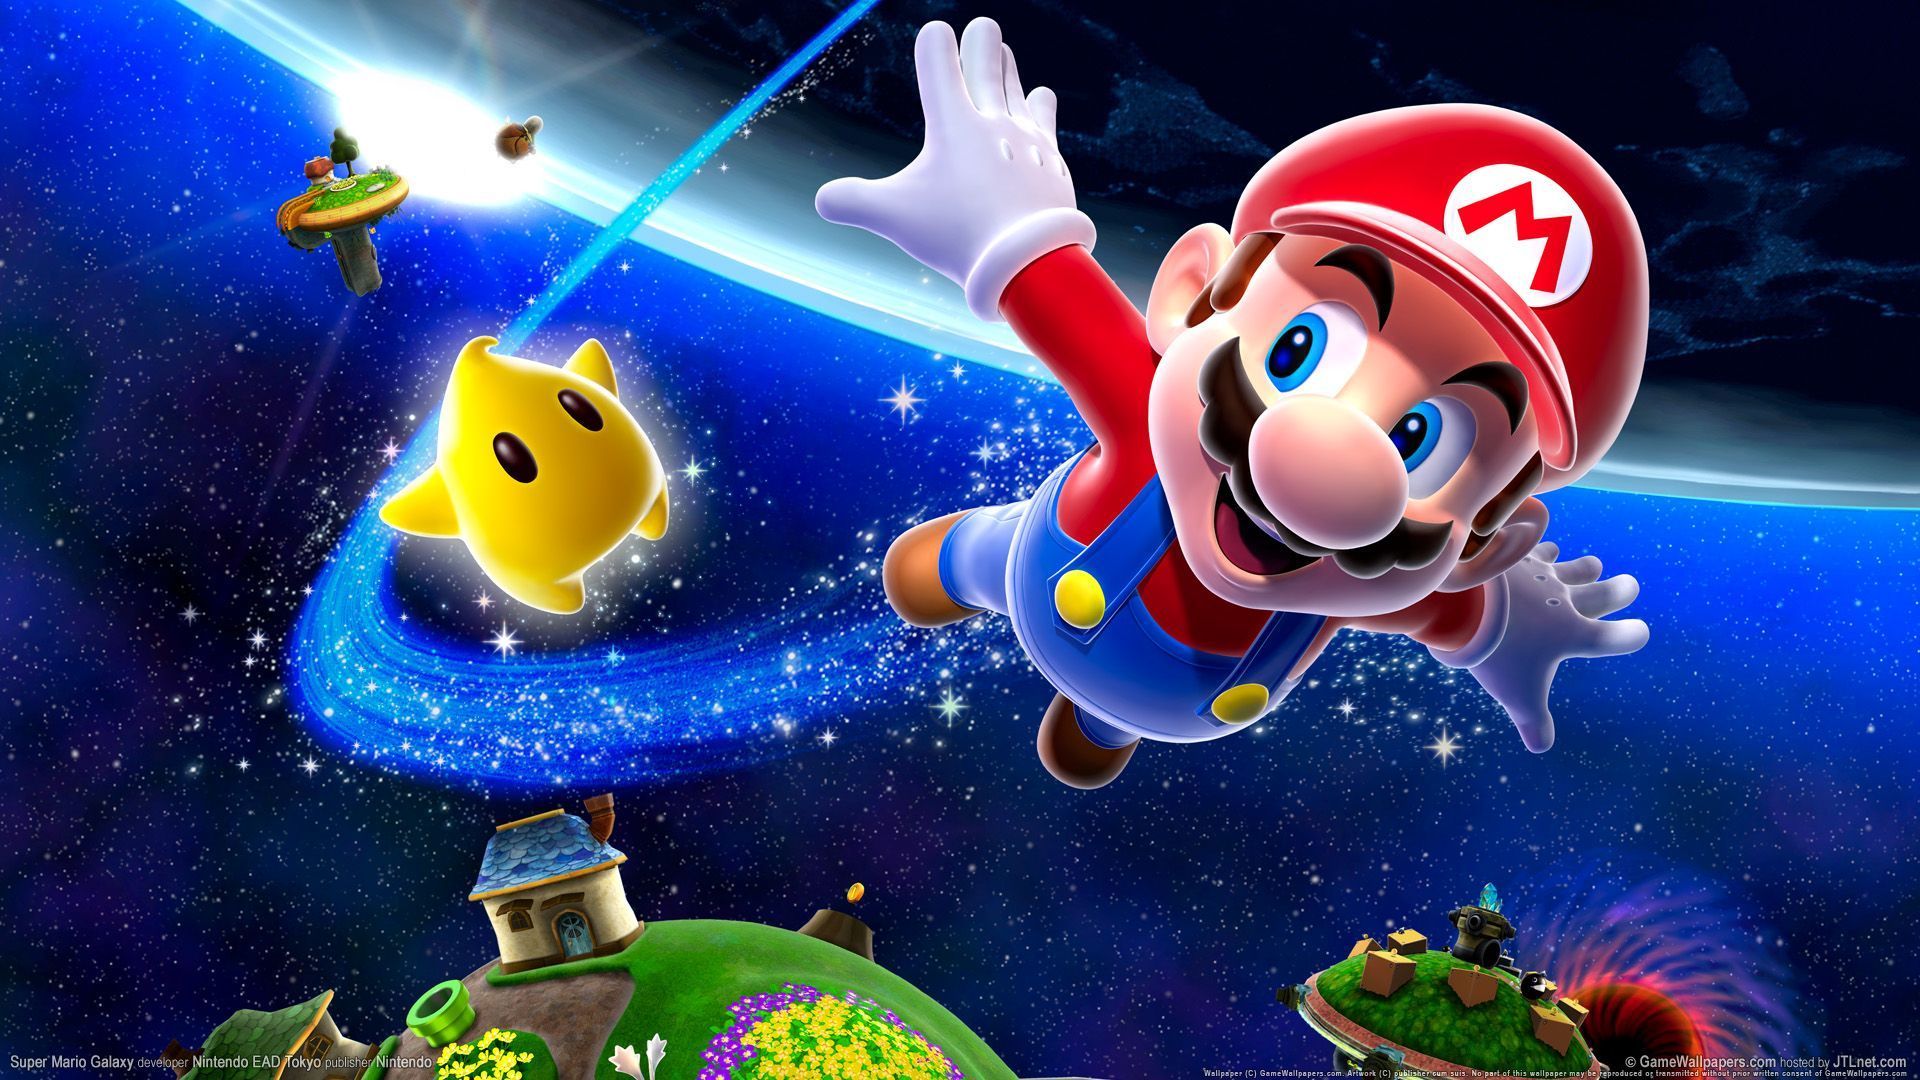 Super Mario Galaxy Wallpapers HD Backgrounds